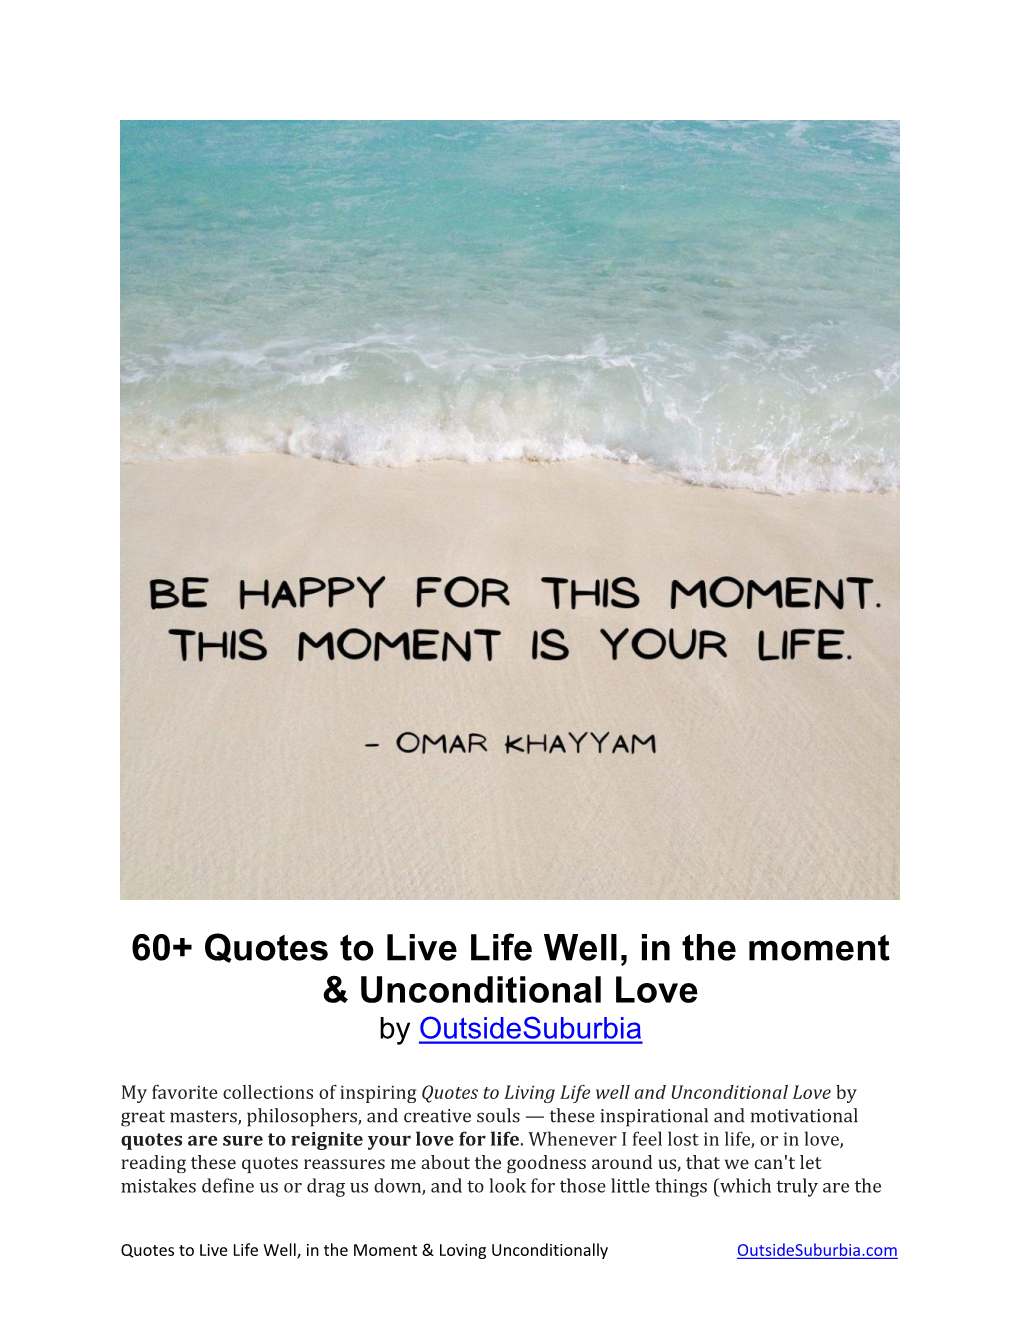 60+ Quotes to Live Life Well, in the Moment & Unconditional Love